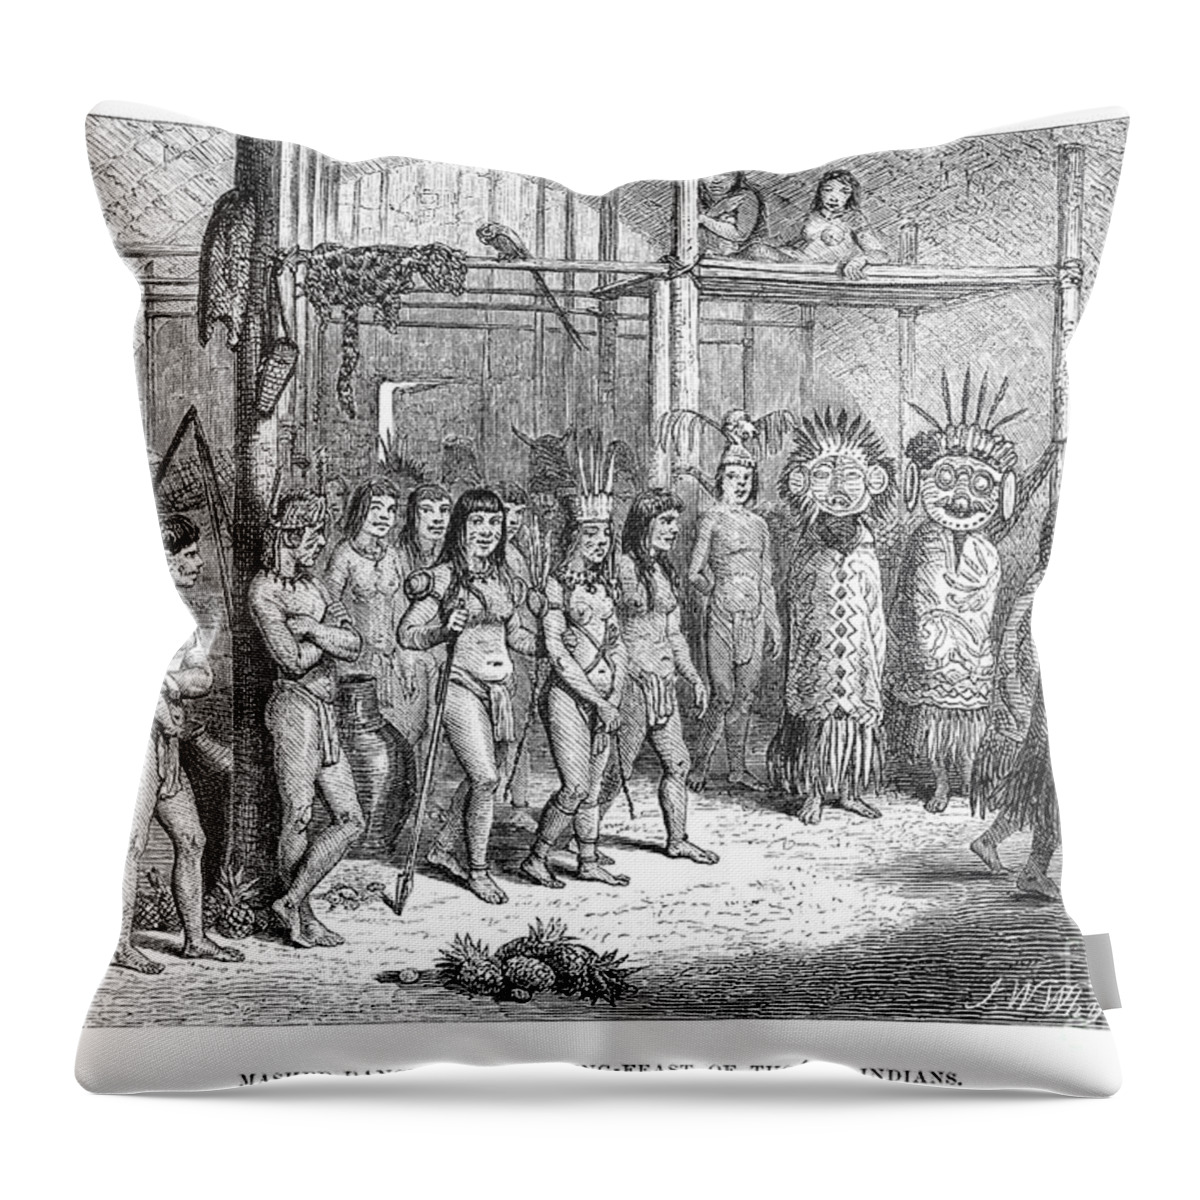 1863 Throw Pillow featuring the photograph Tucuna Indians, 1863 by Granger